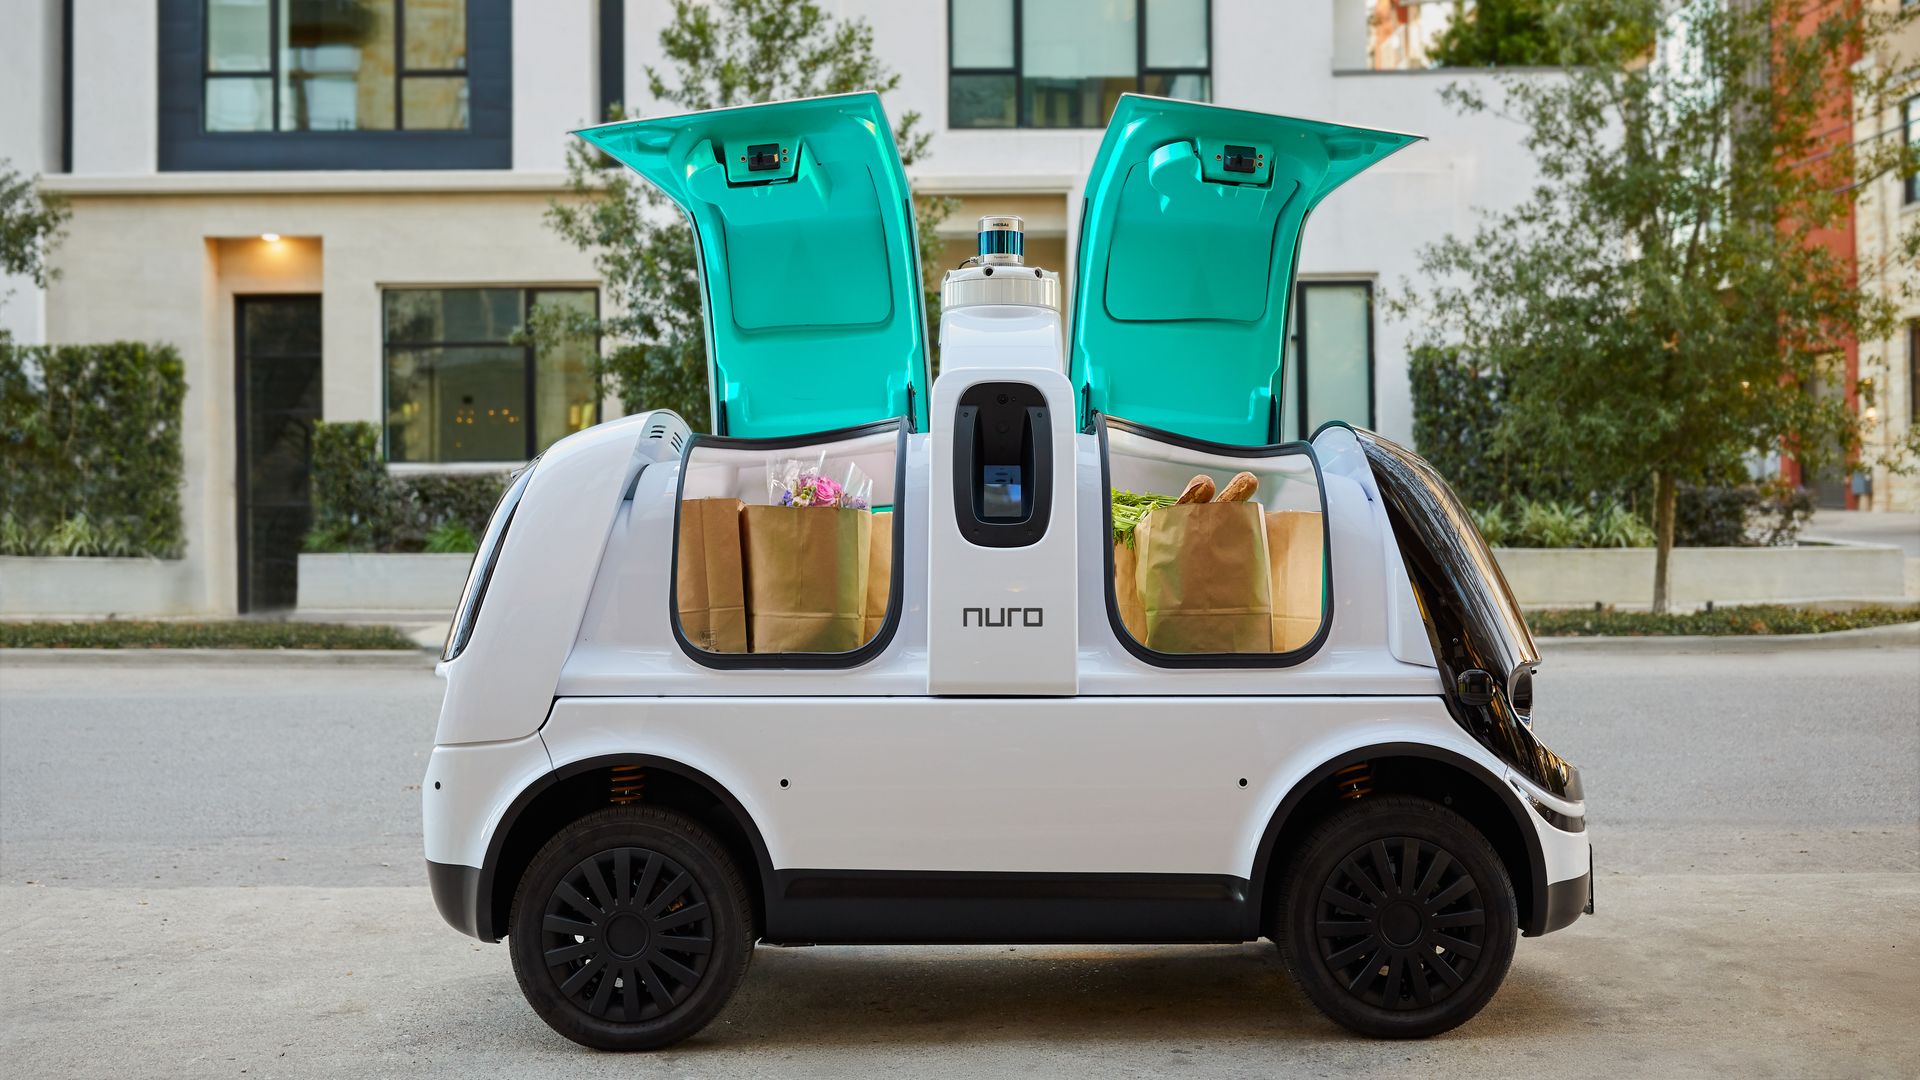 Image of Nuro's delivery vehicle with groceries inside